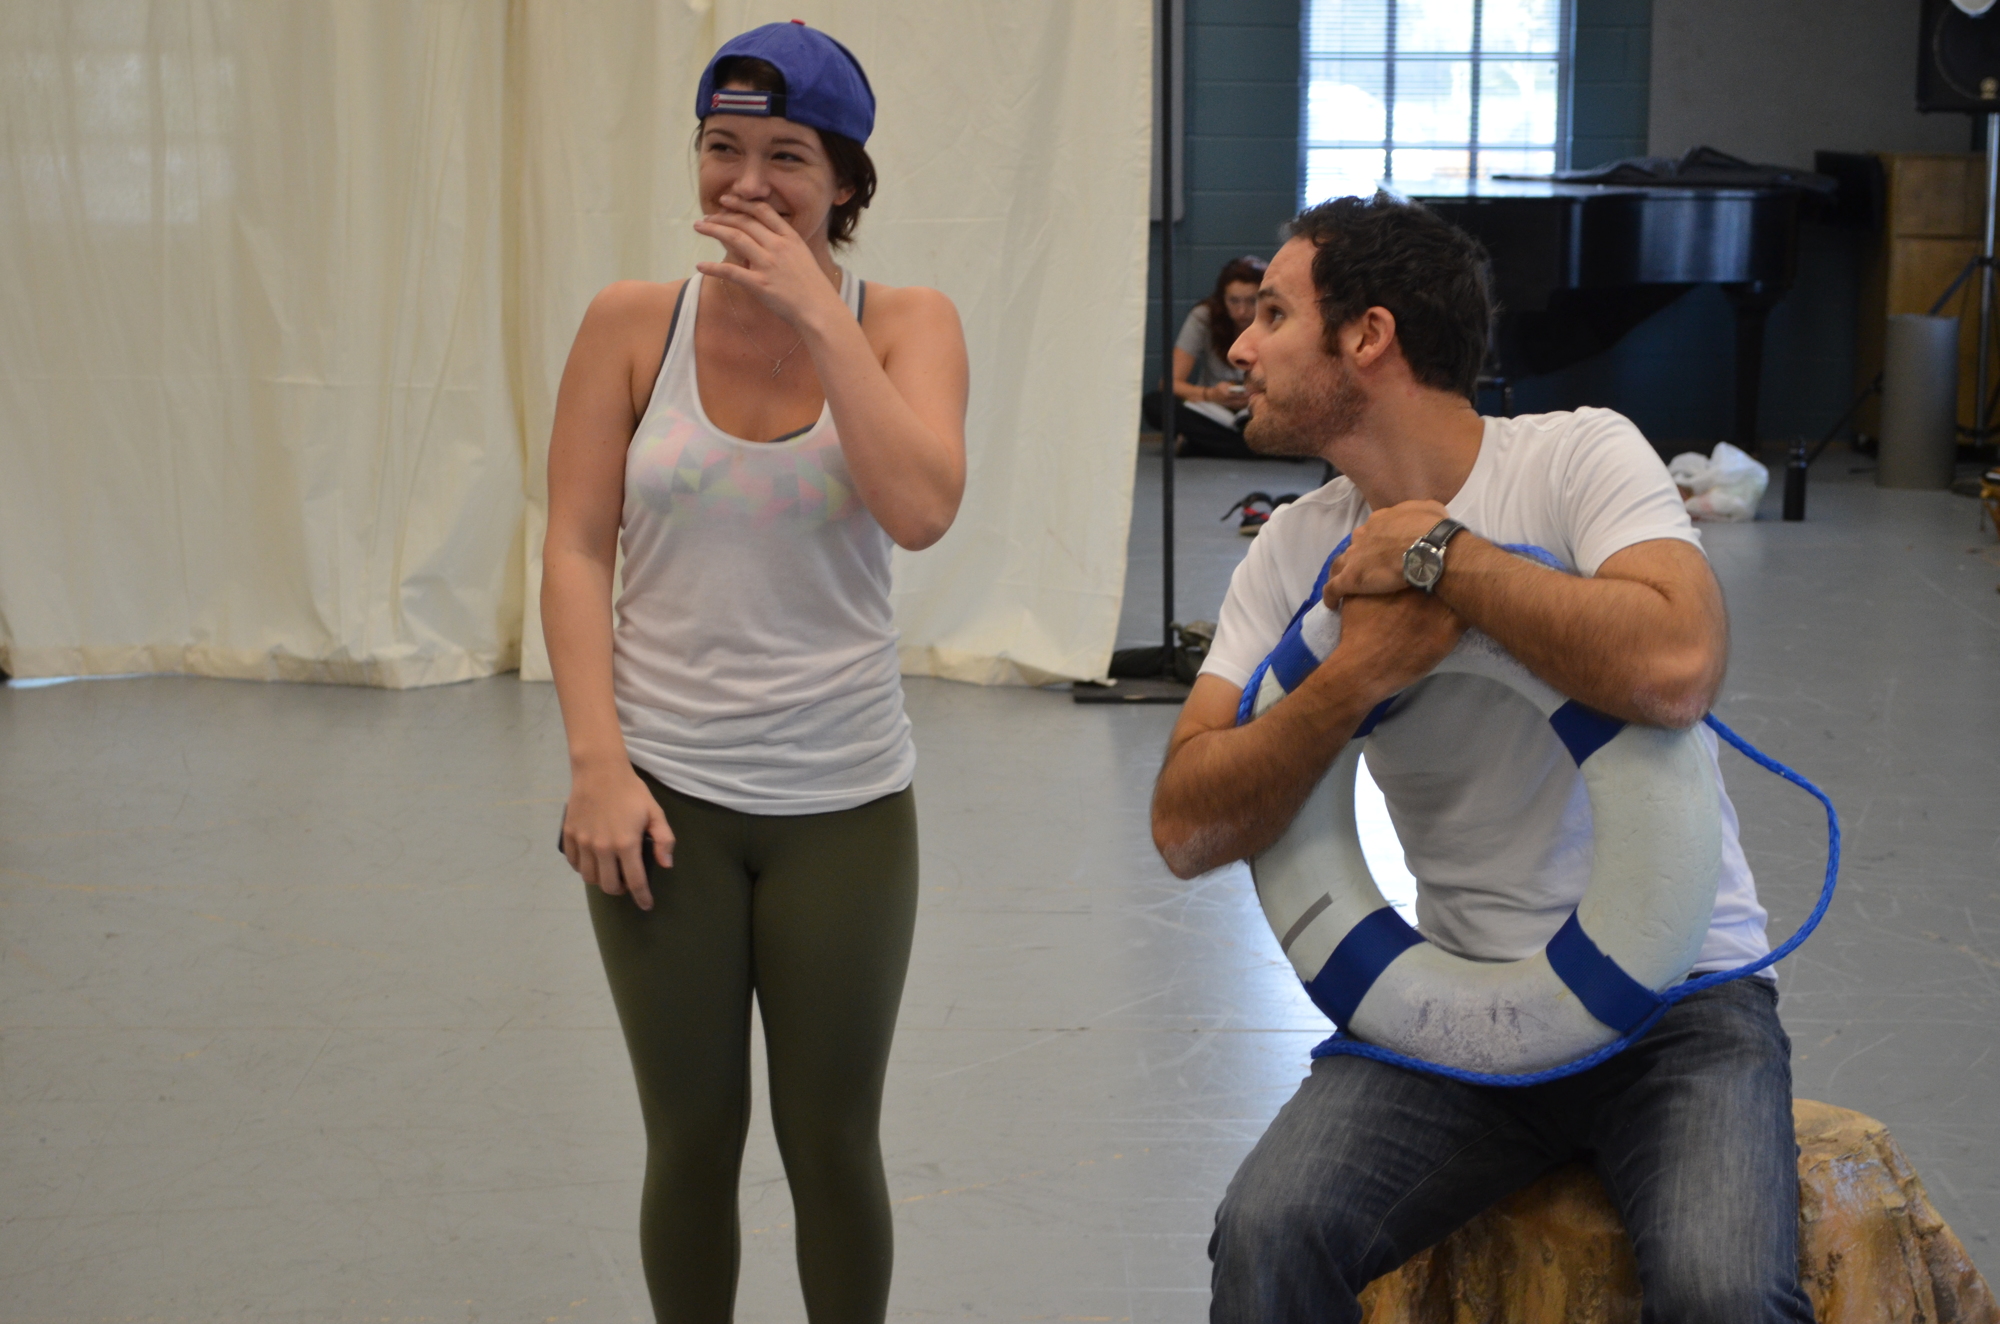 A playful moment between Kelsey Petersen (Viola/Cesario) and Kevin Barber (Orsino).